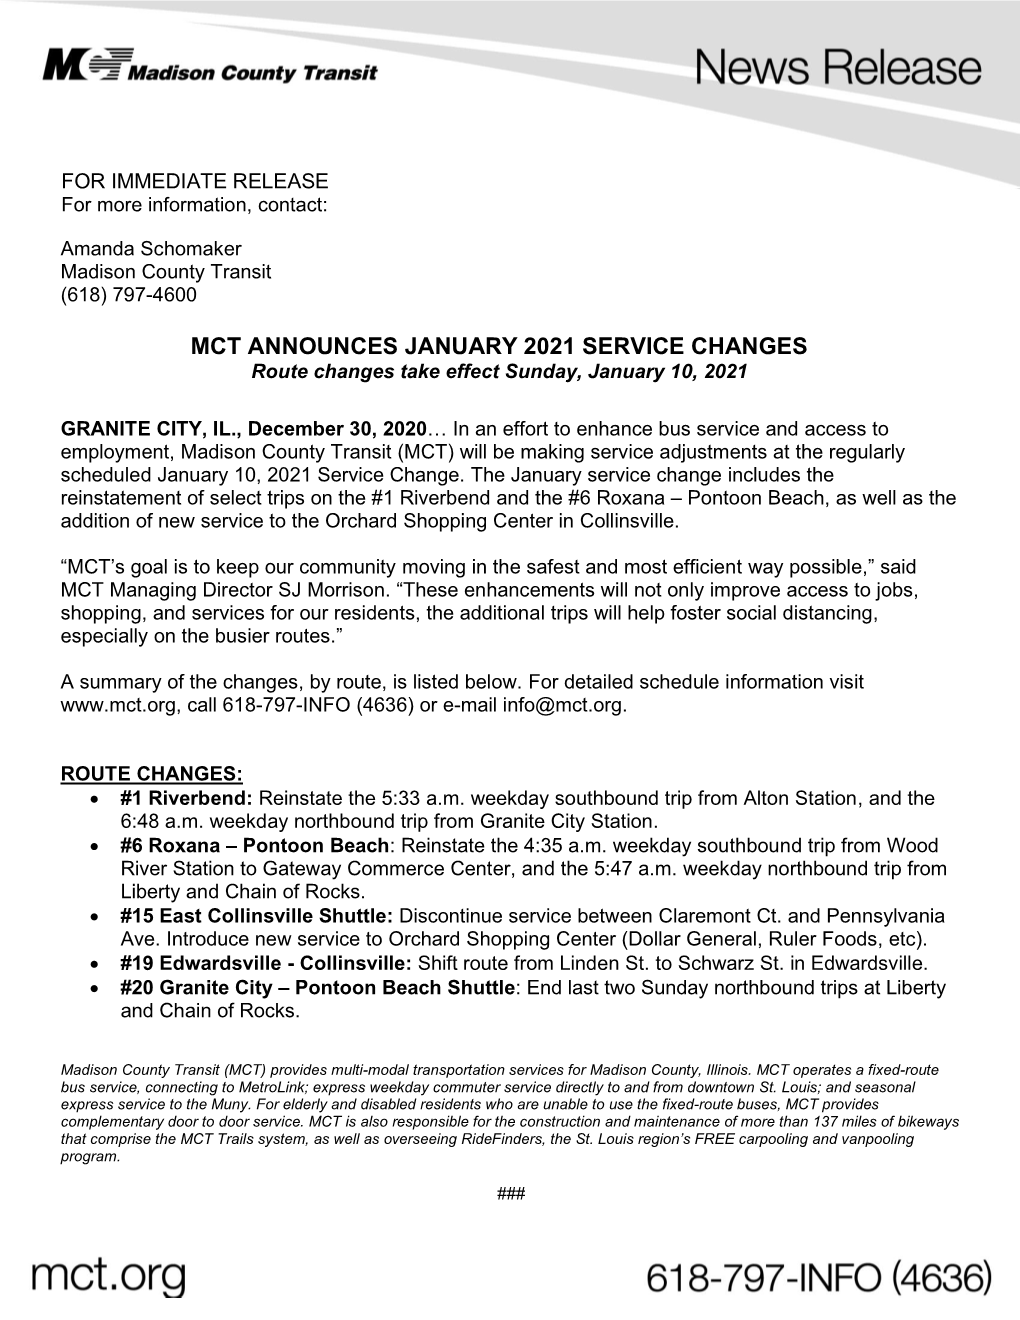 MCT ANNOUNCES JANUARY 2021 SERVICE CHANGES Route Changes Take Effect Sunday, January 10, 2021